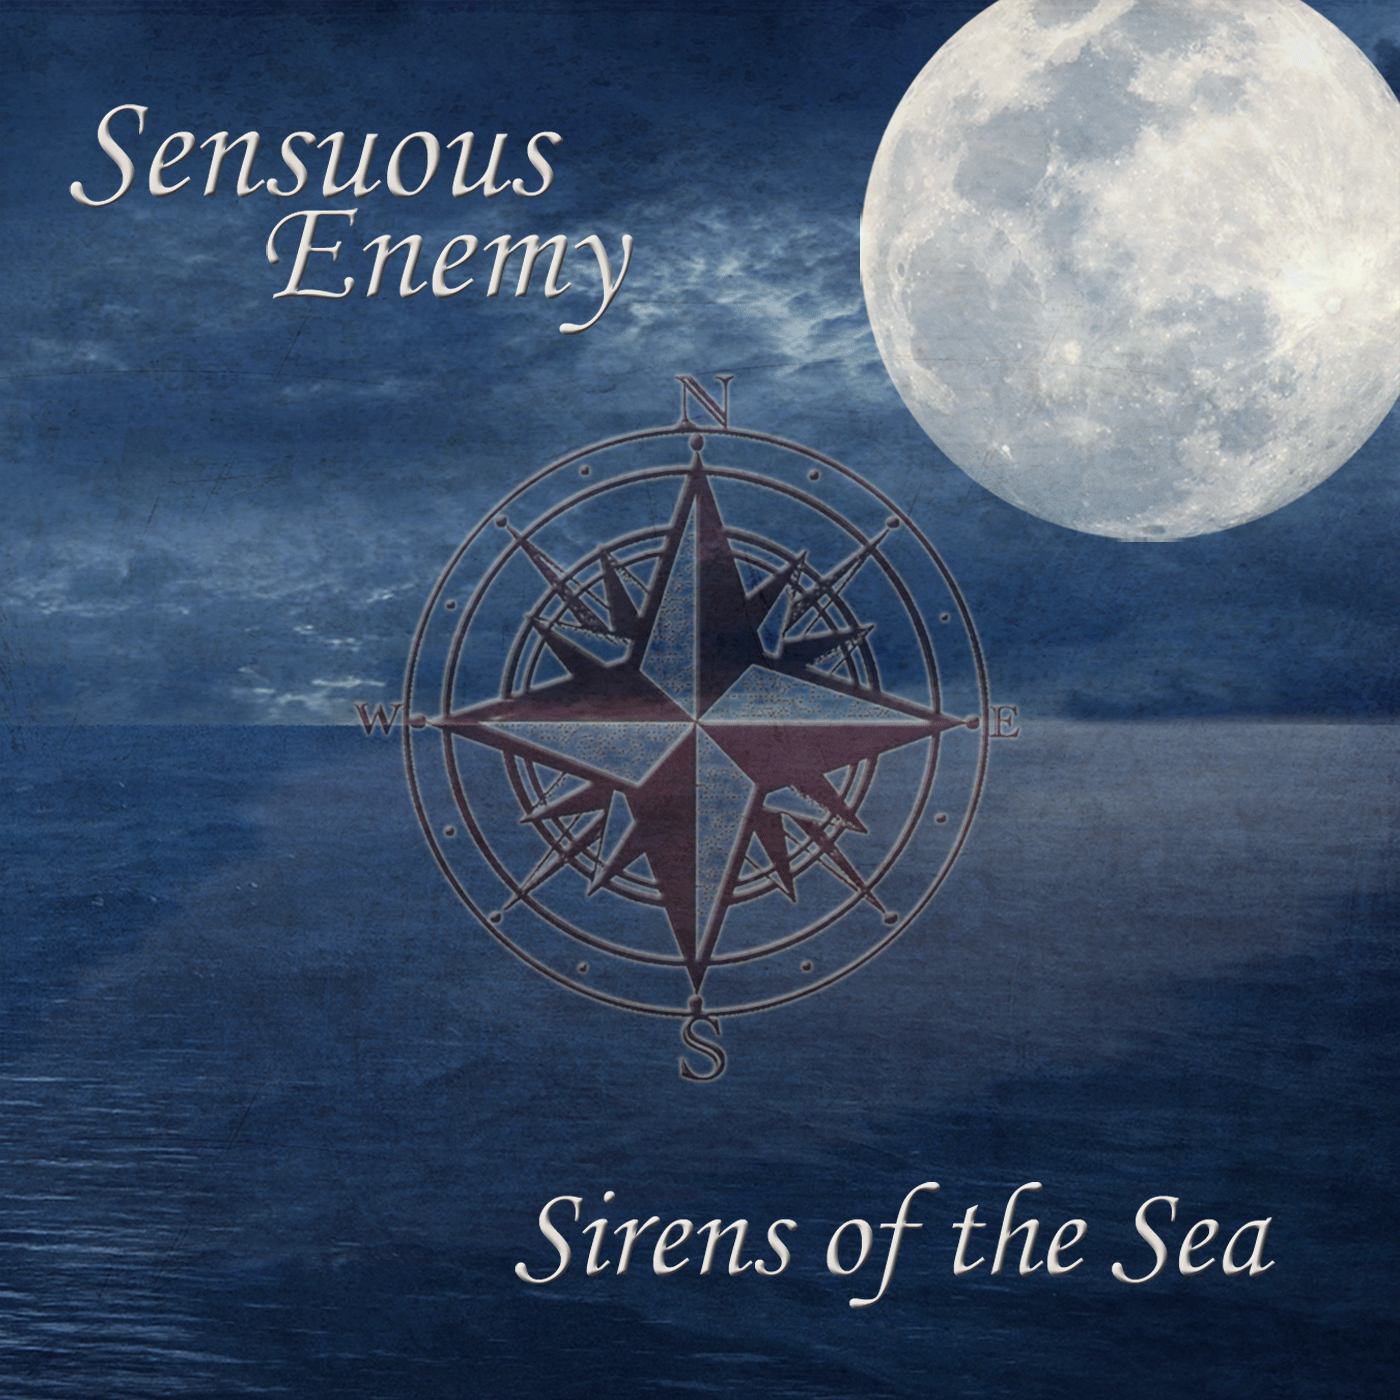 Sirens of the Sea